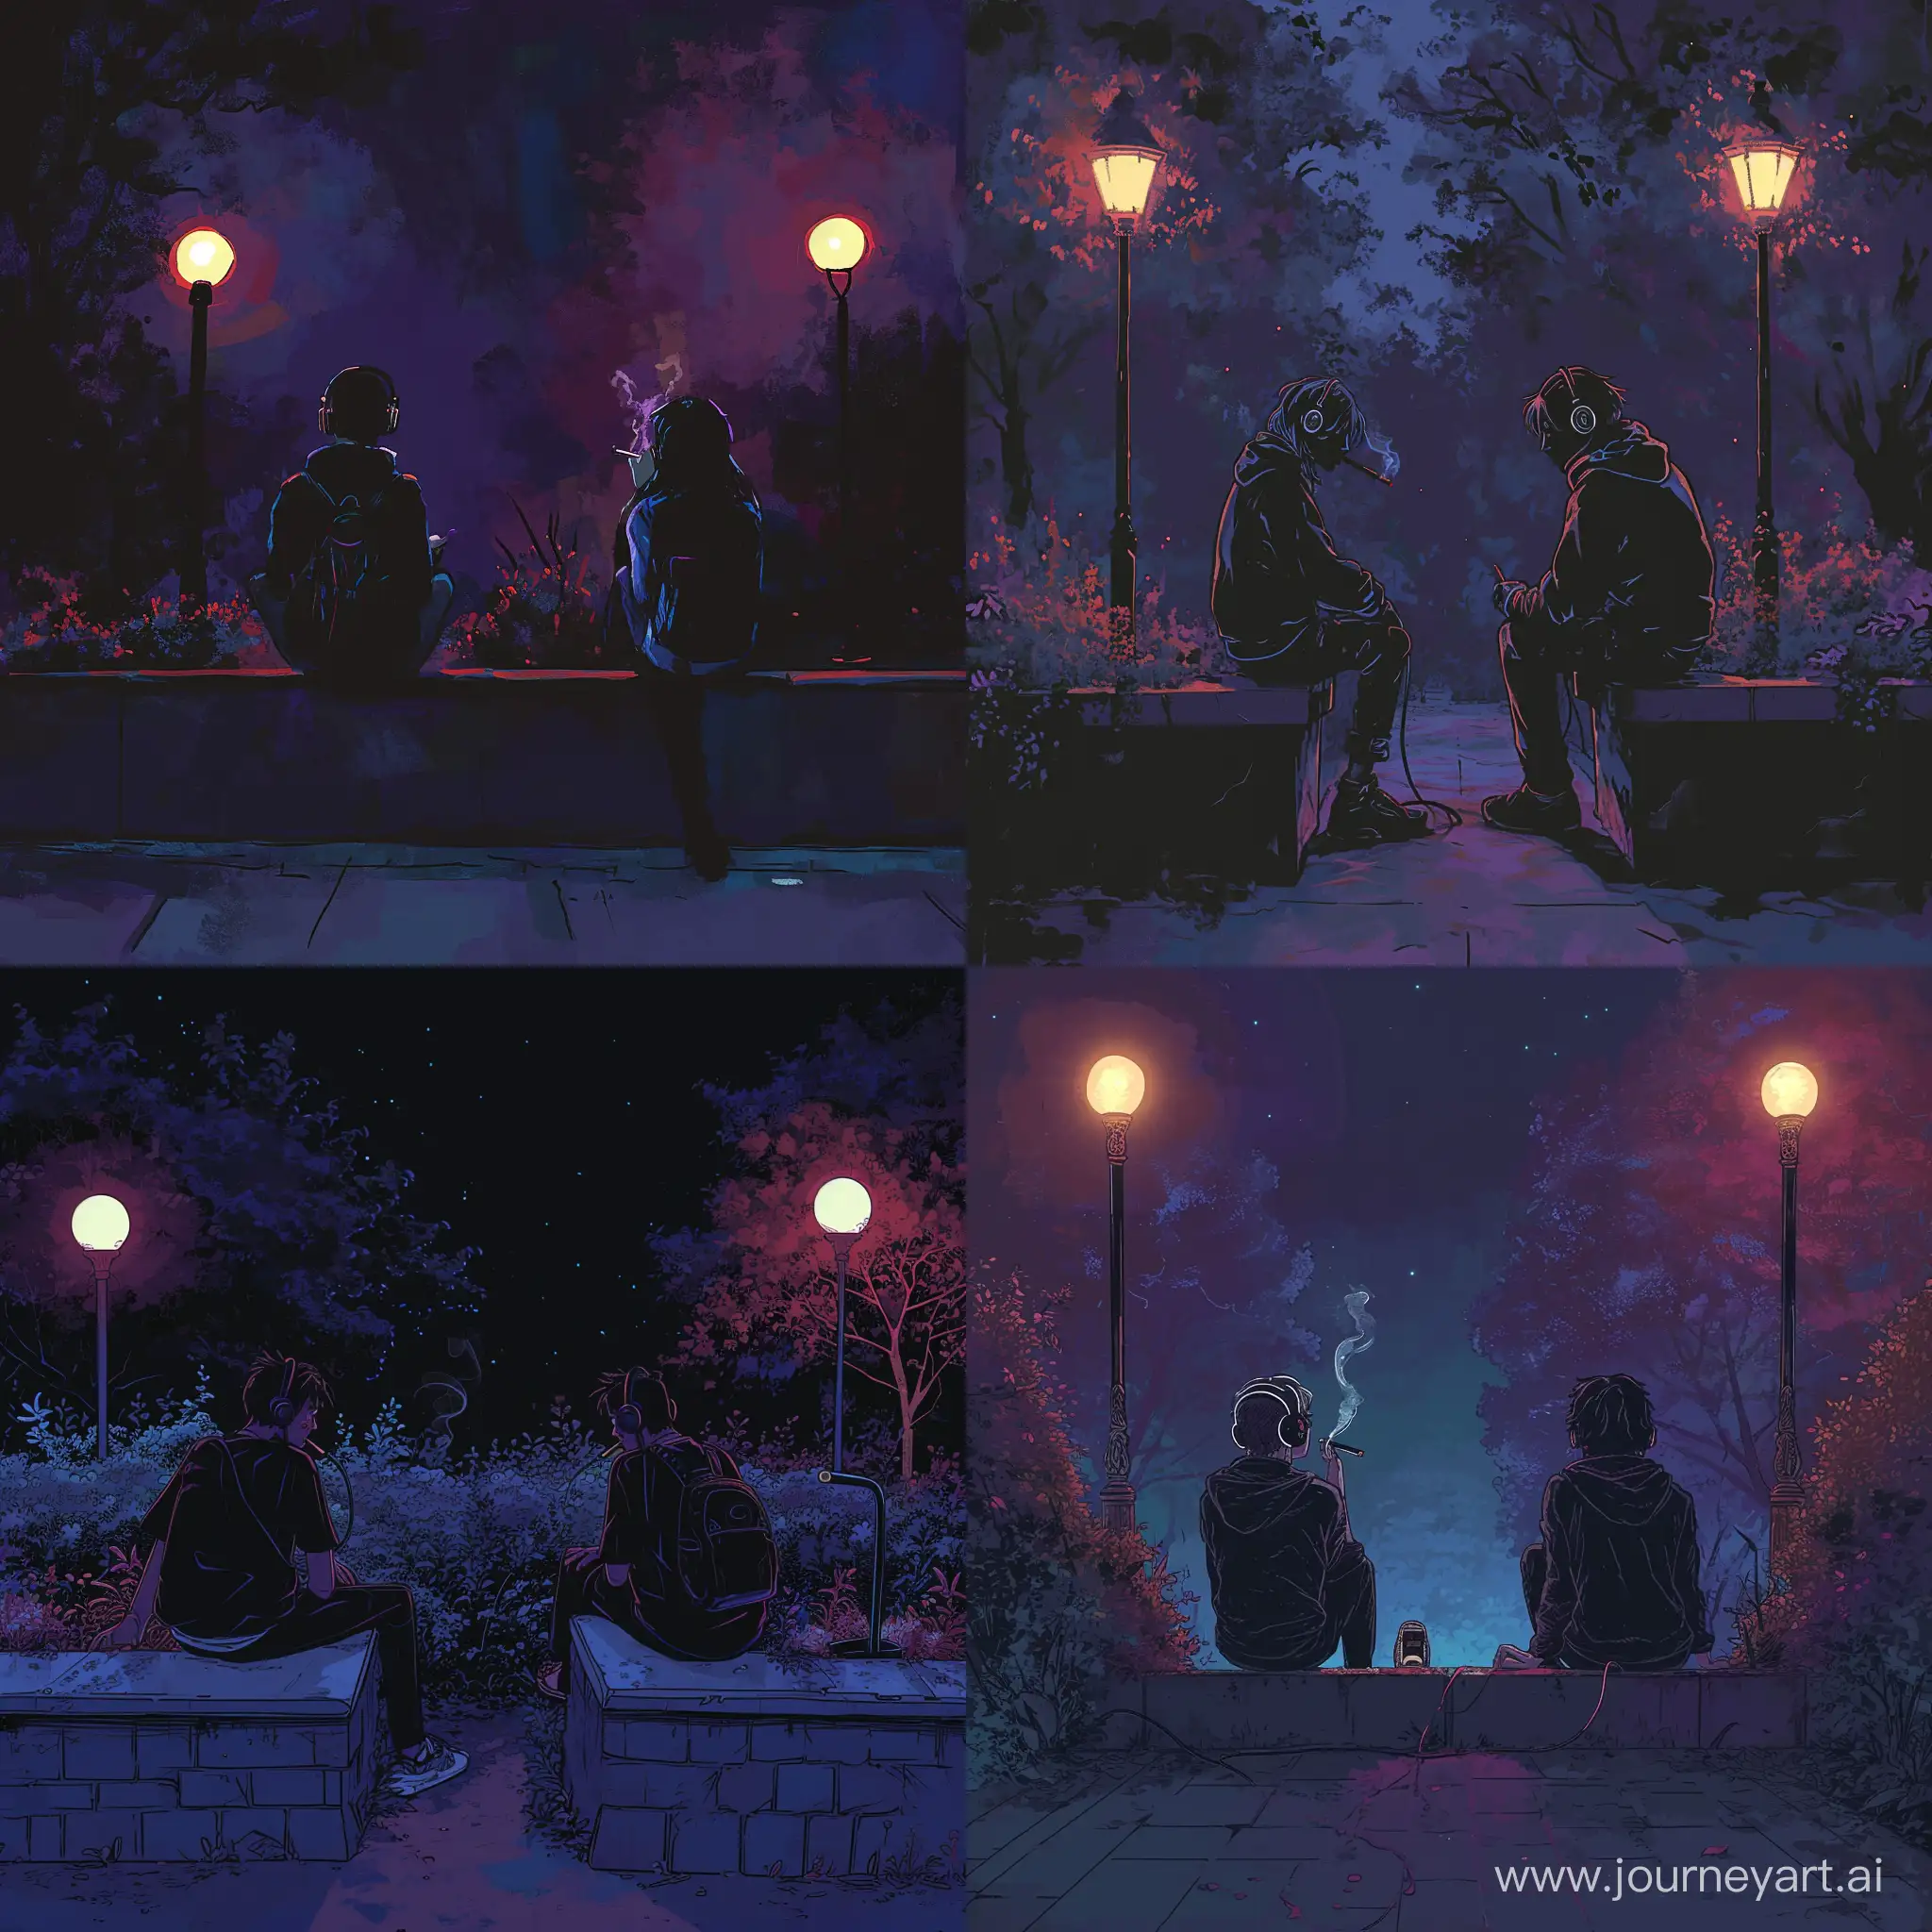 Two human figures, shaped by the shadows, sit on two low walls at night. They smoke, wear headphones, and enjoy the tranquility. There are two streetlights illuminating; everything else is dark. The scene is colored in shades of purple, blue, black, reddish, and nocturnal hues. The individuals are dressed casually, sitting with their backs turned.